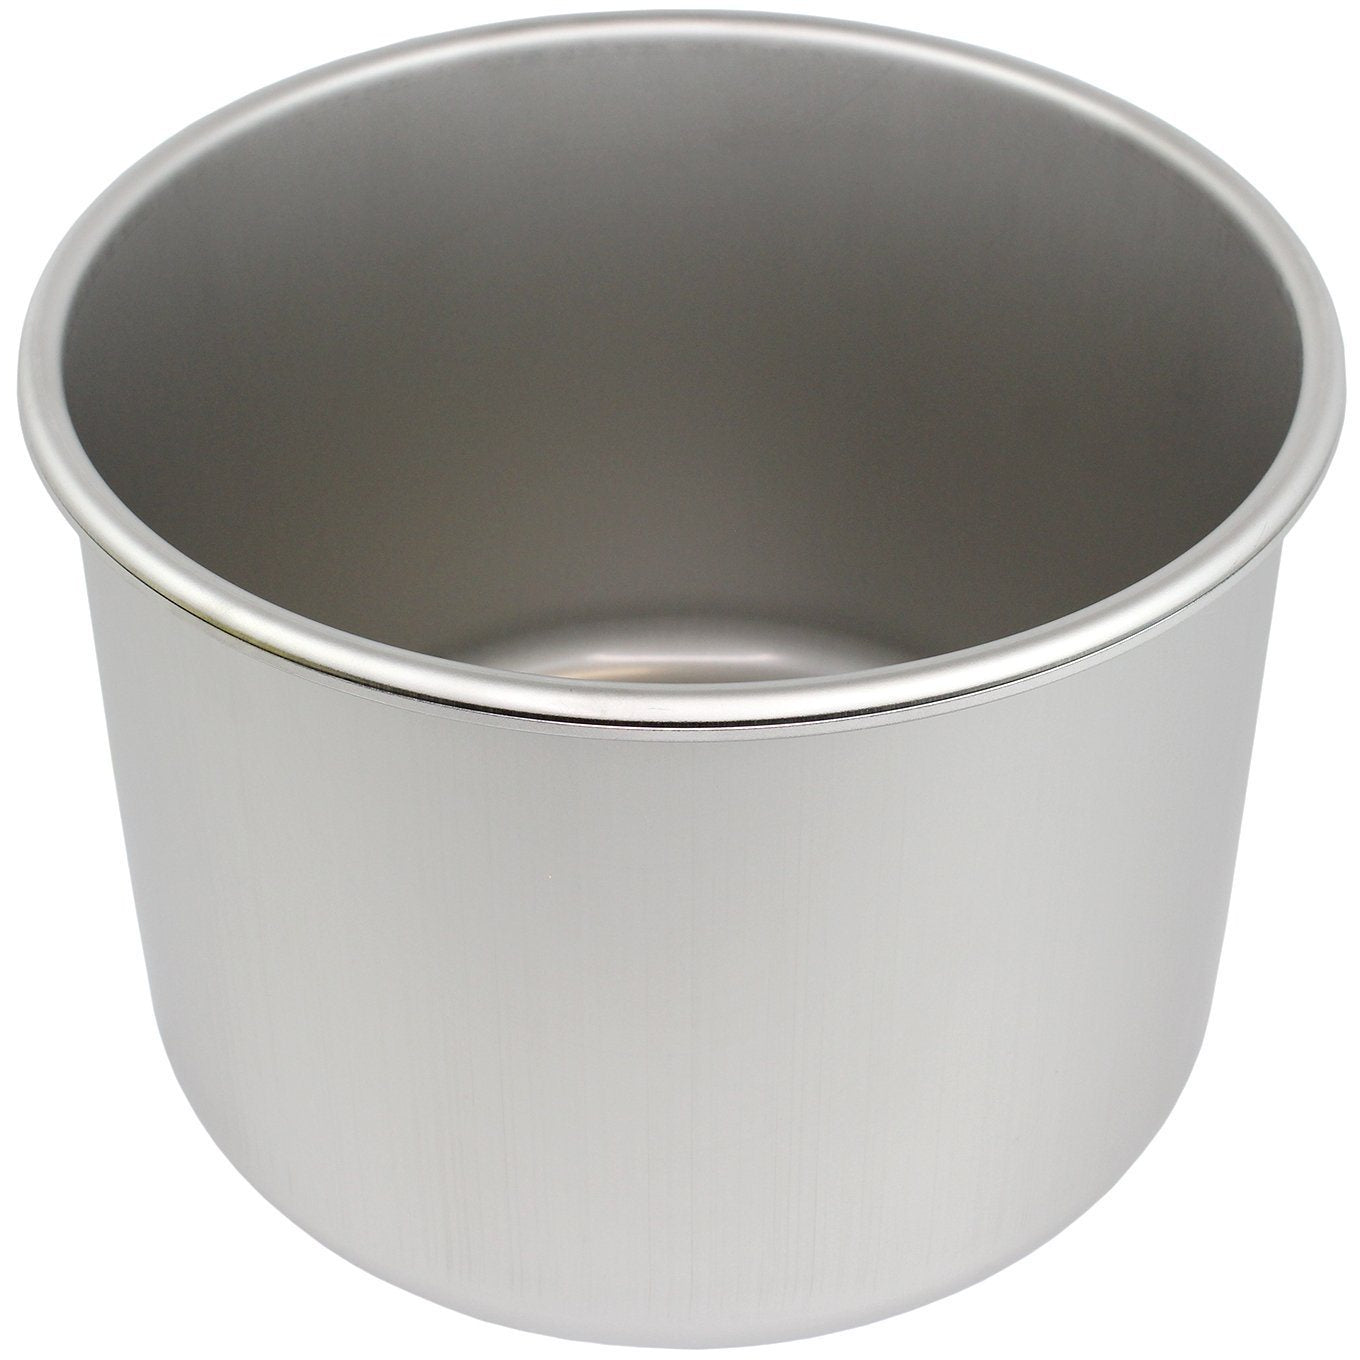 BVV 3 Gallon WIDE Stainless Steel - POT ONLY